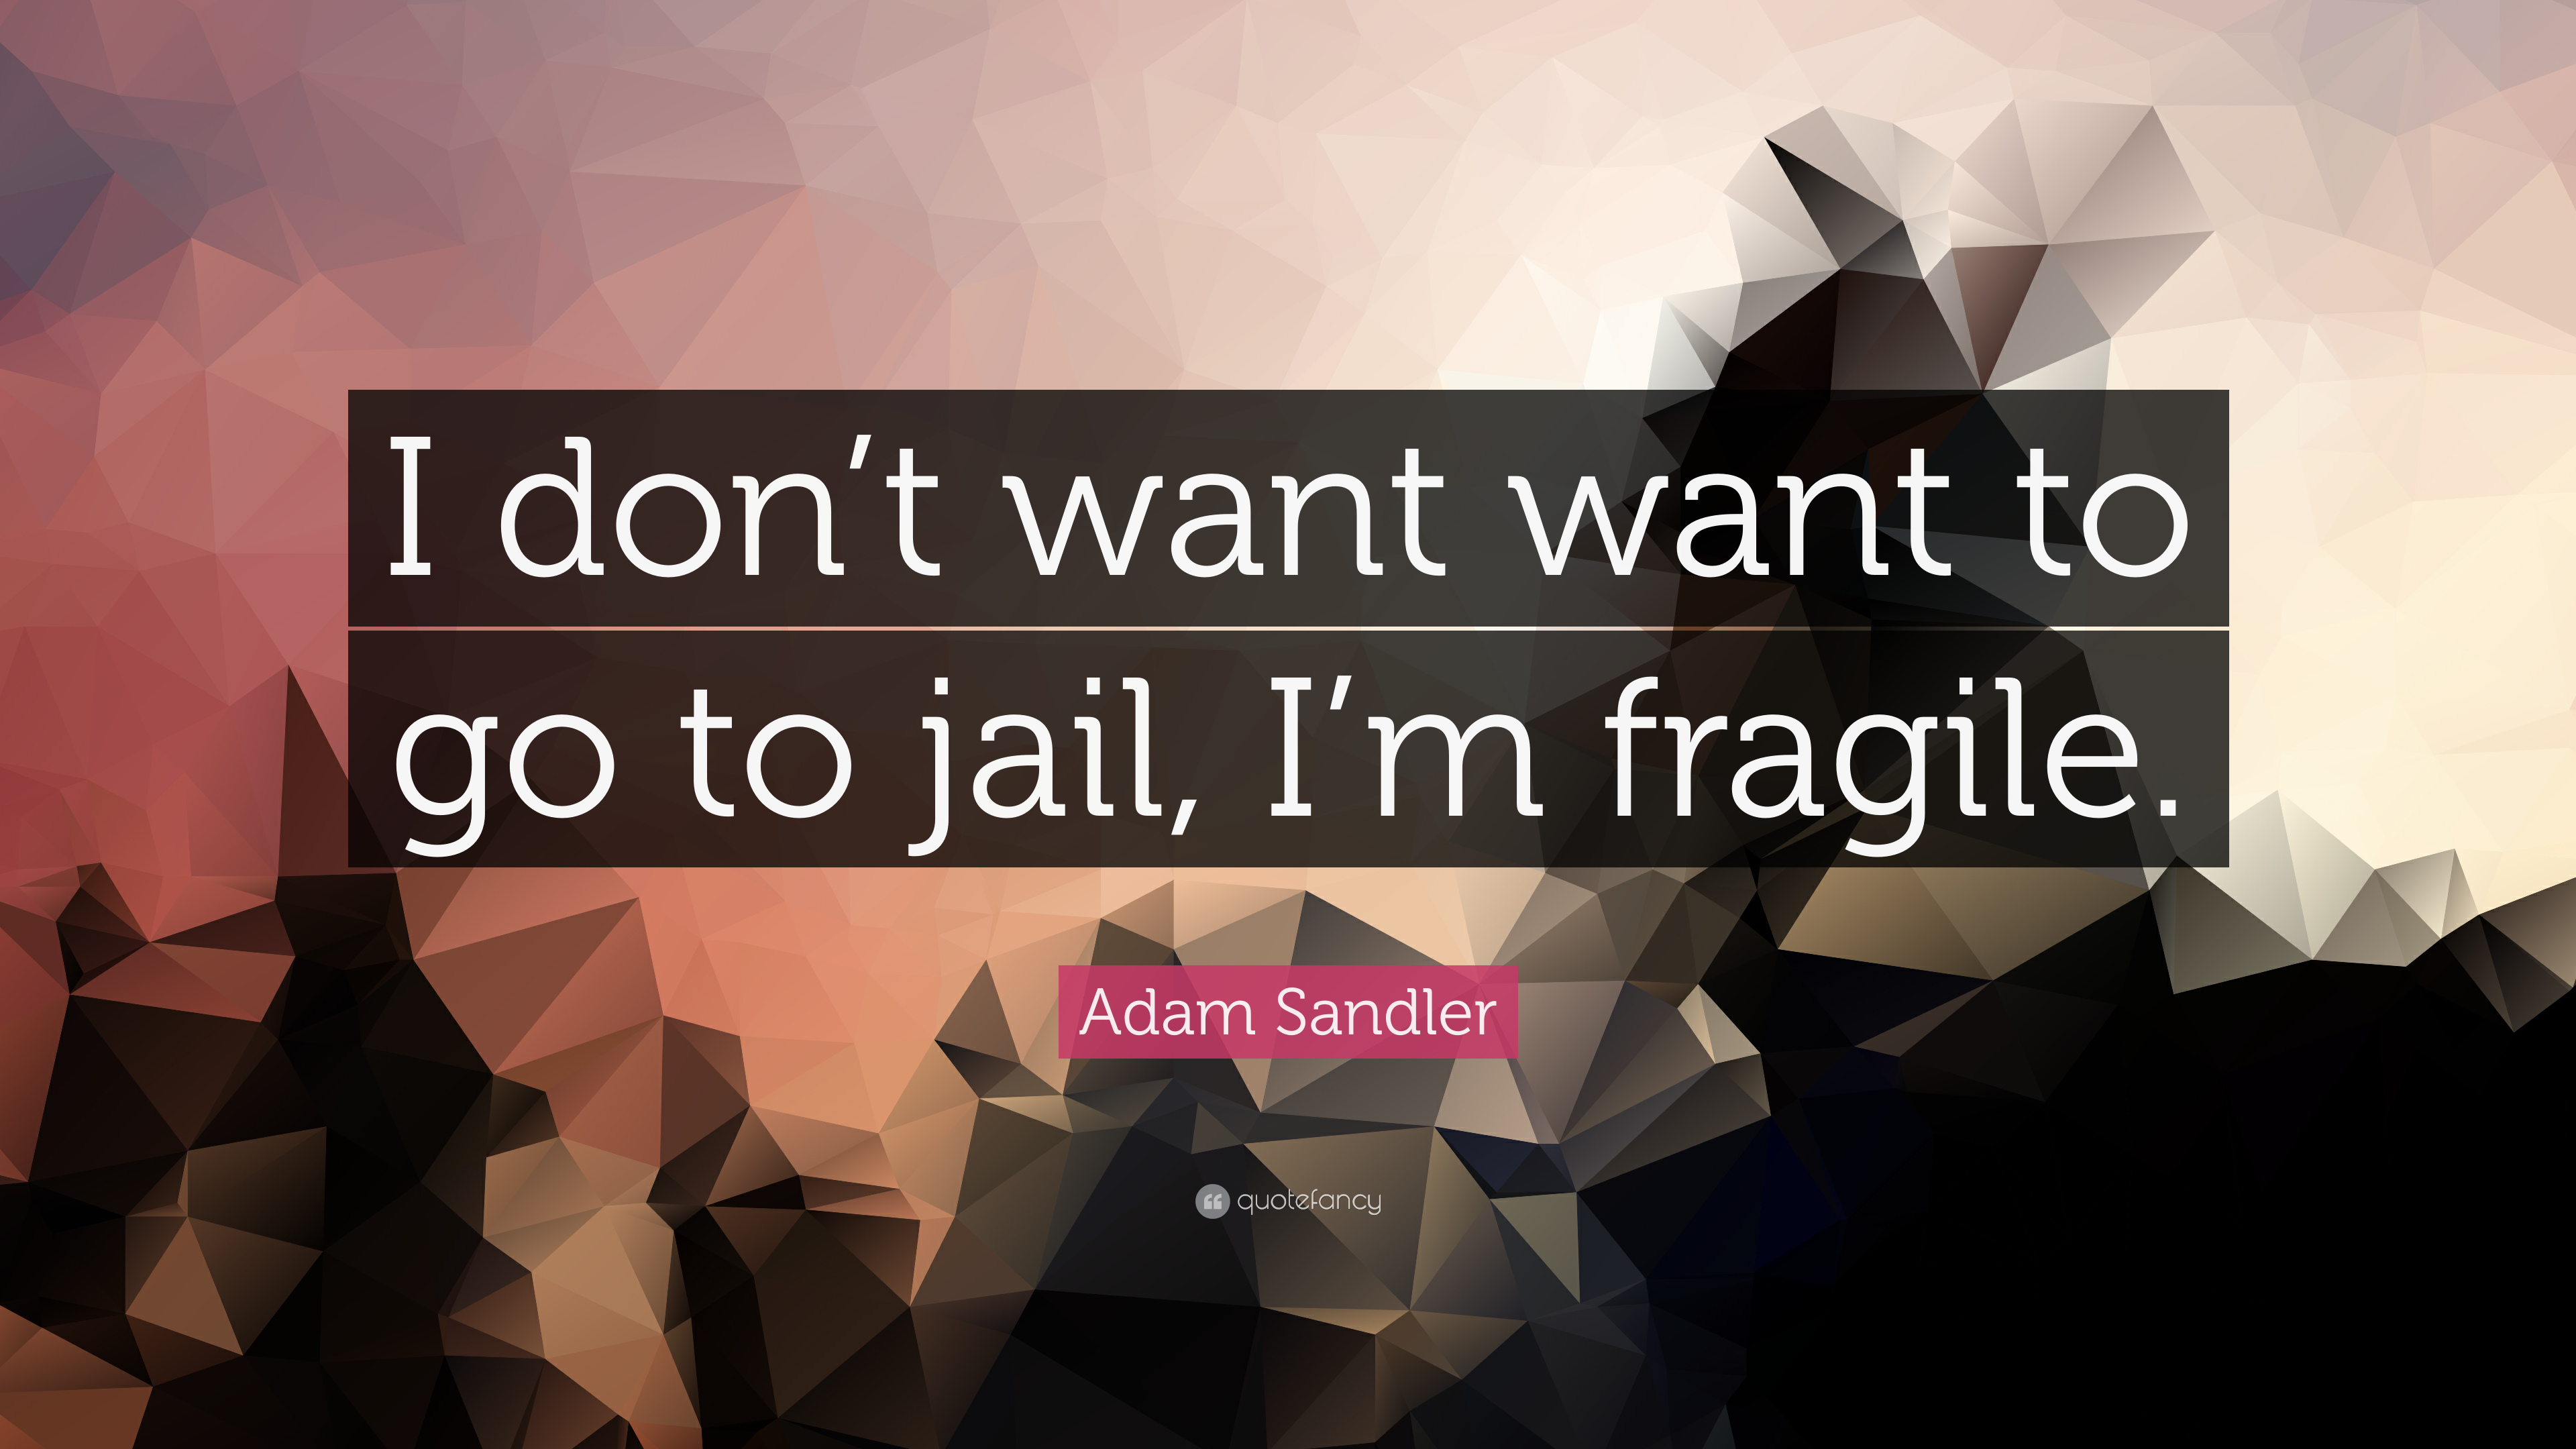 Adam Sandler Quote: “I don't want want to go to jail, I'm fragile ...